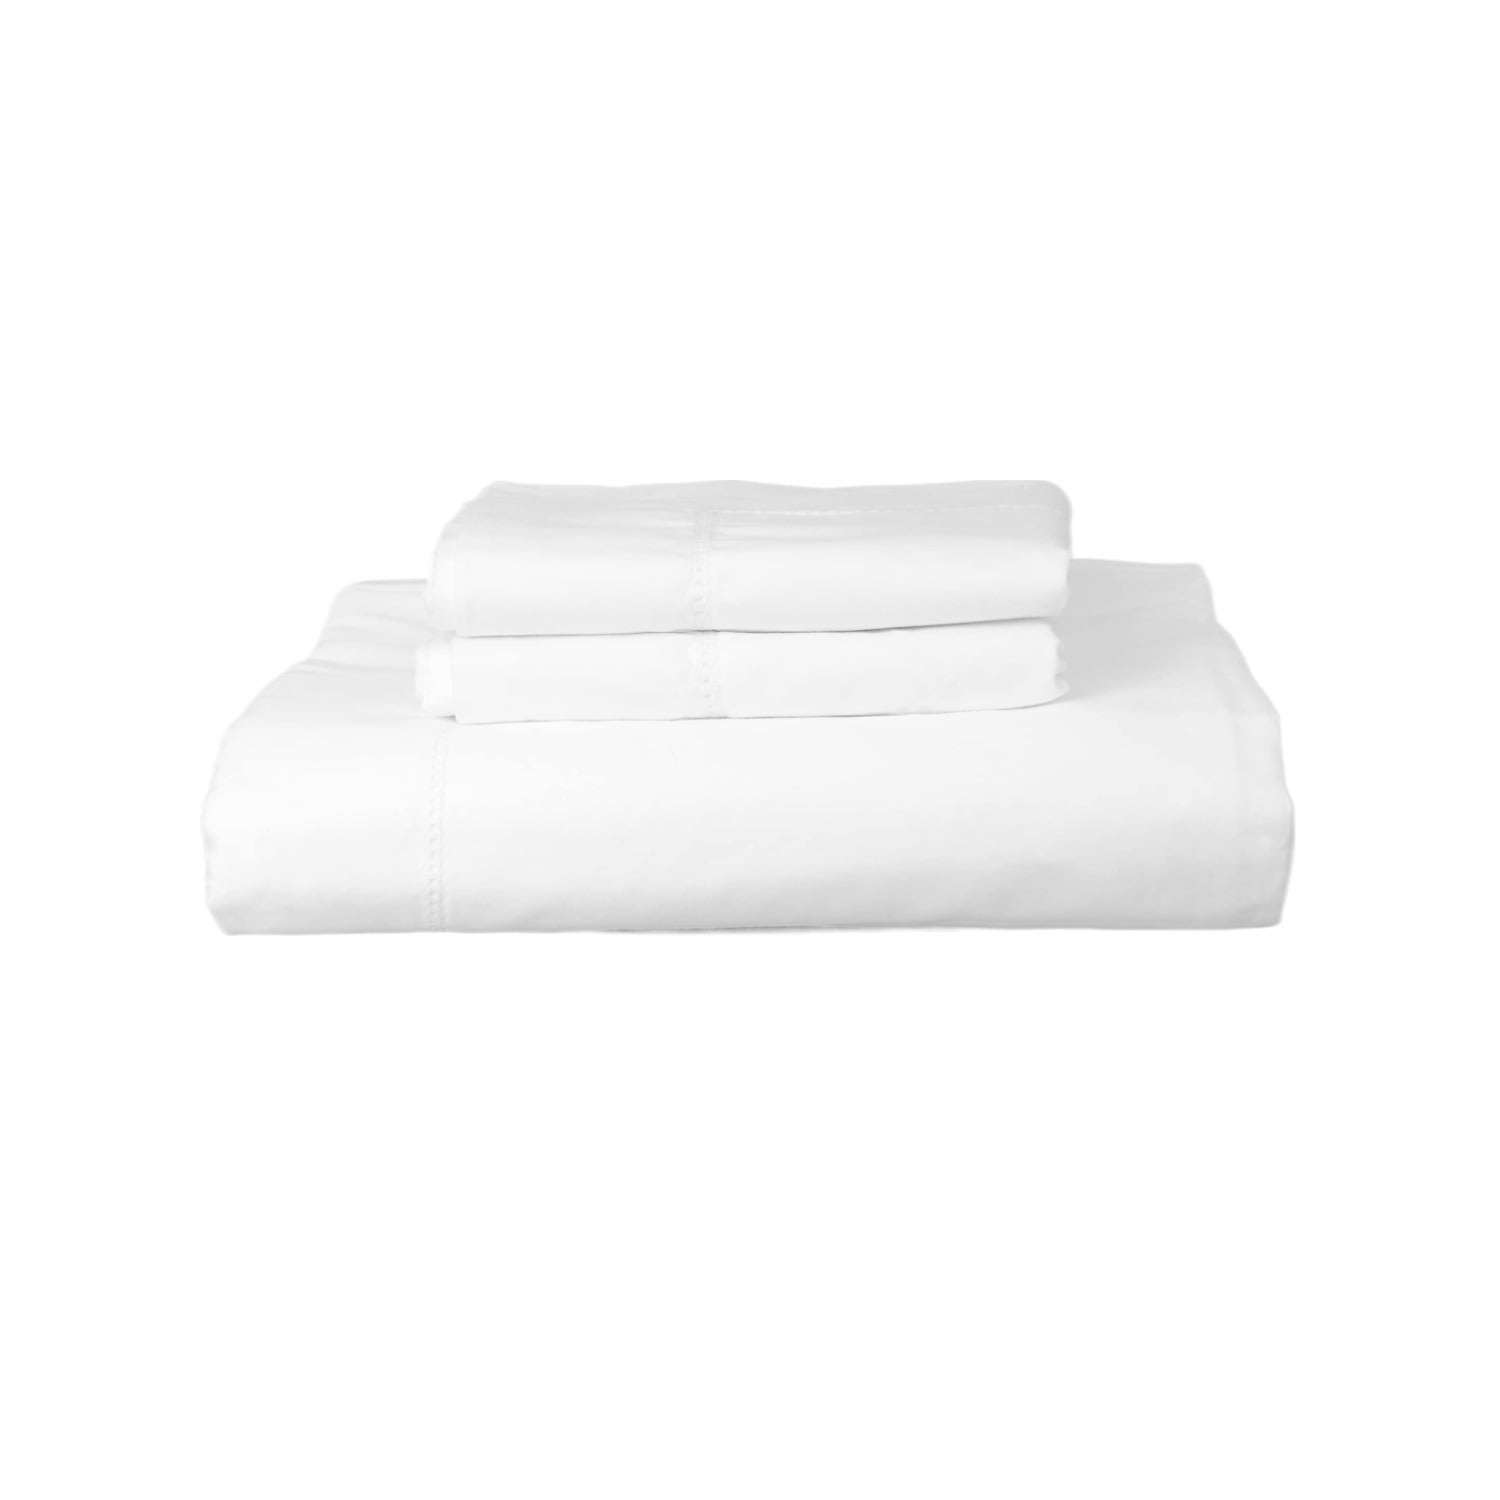 White Hemstitch 200 Thread Count Bed Linen Set Super King & Standard Pillowcases Uk Super King Tielle Love Luxury by Tradelinens